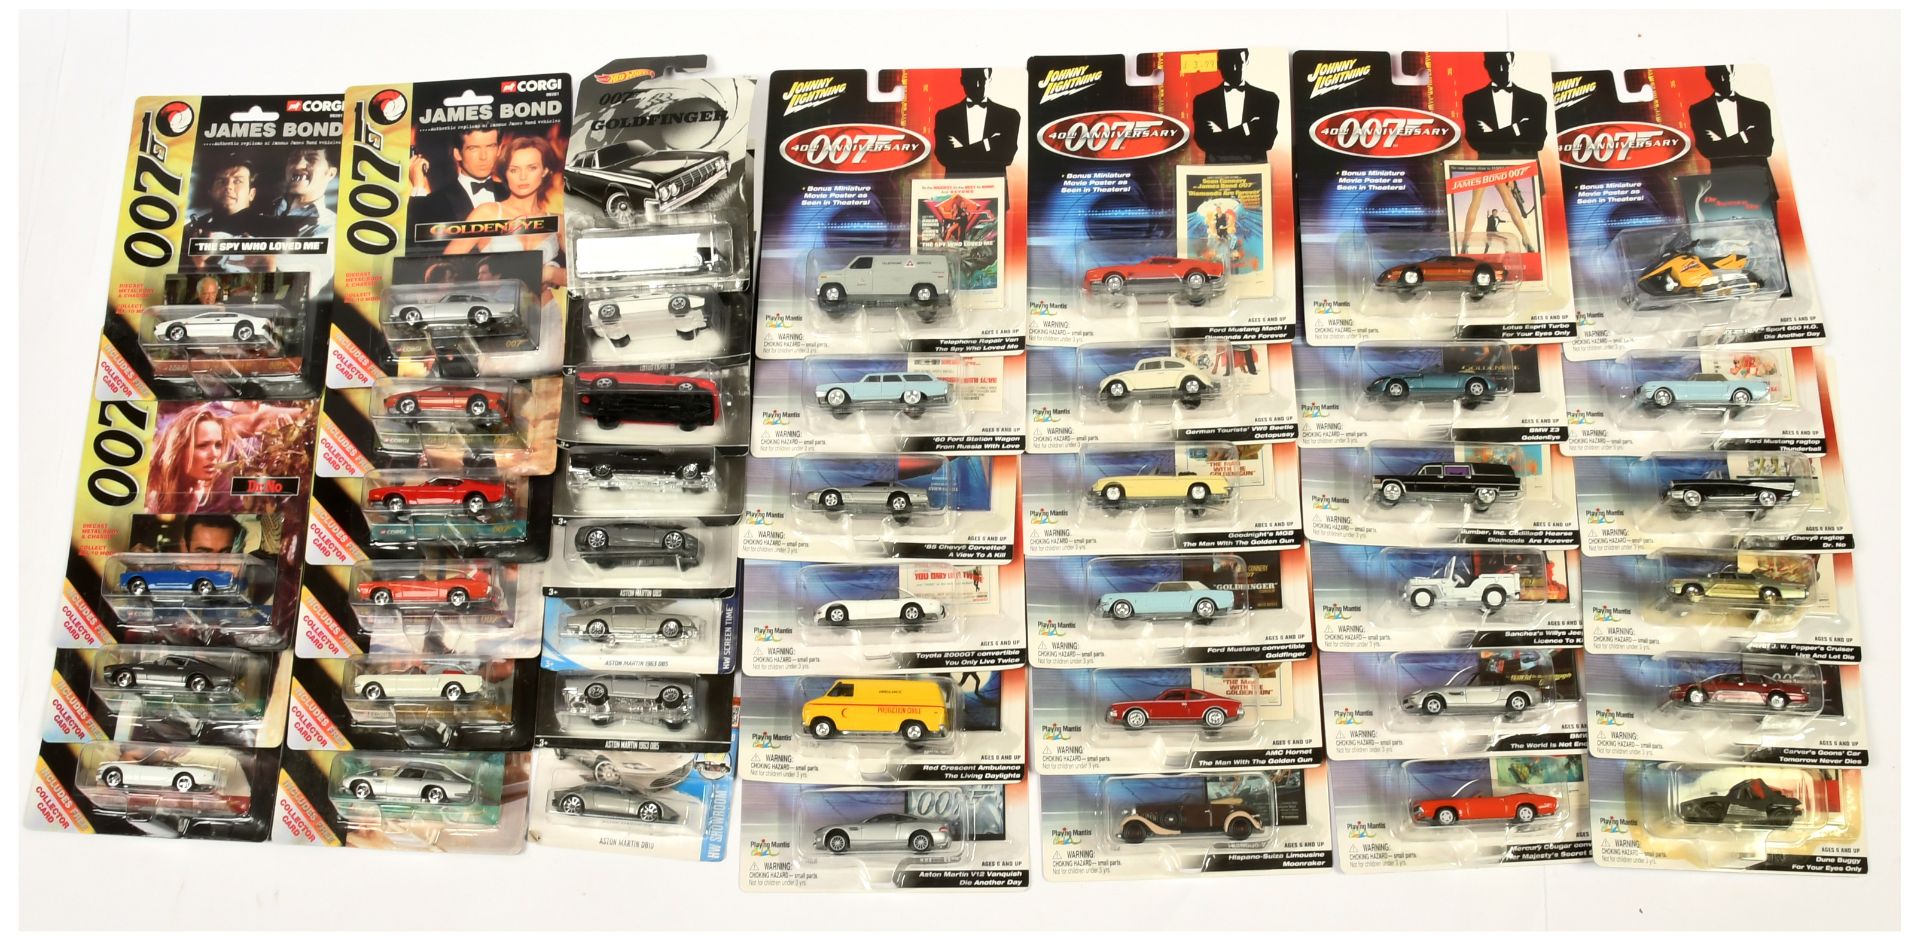 James Bond 007 related 1:64 scale vehicles x 42